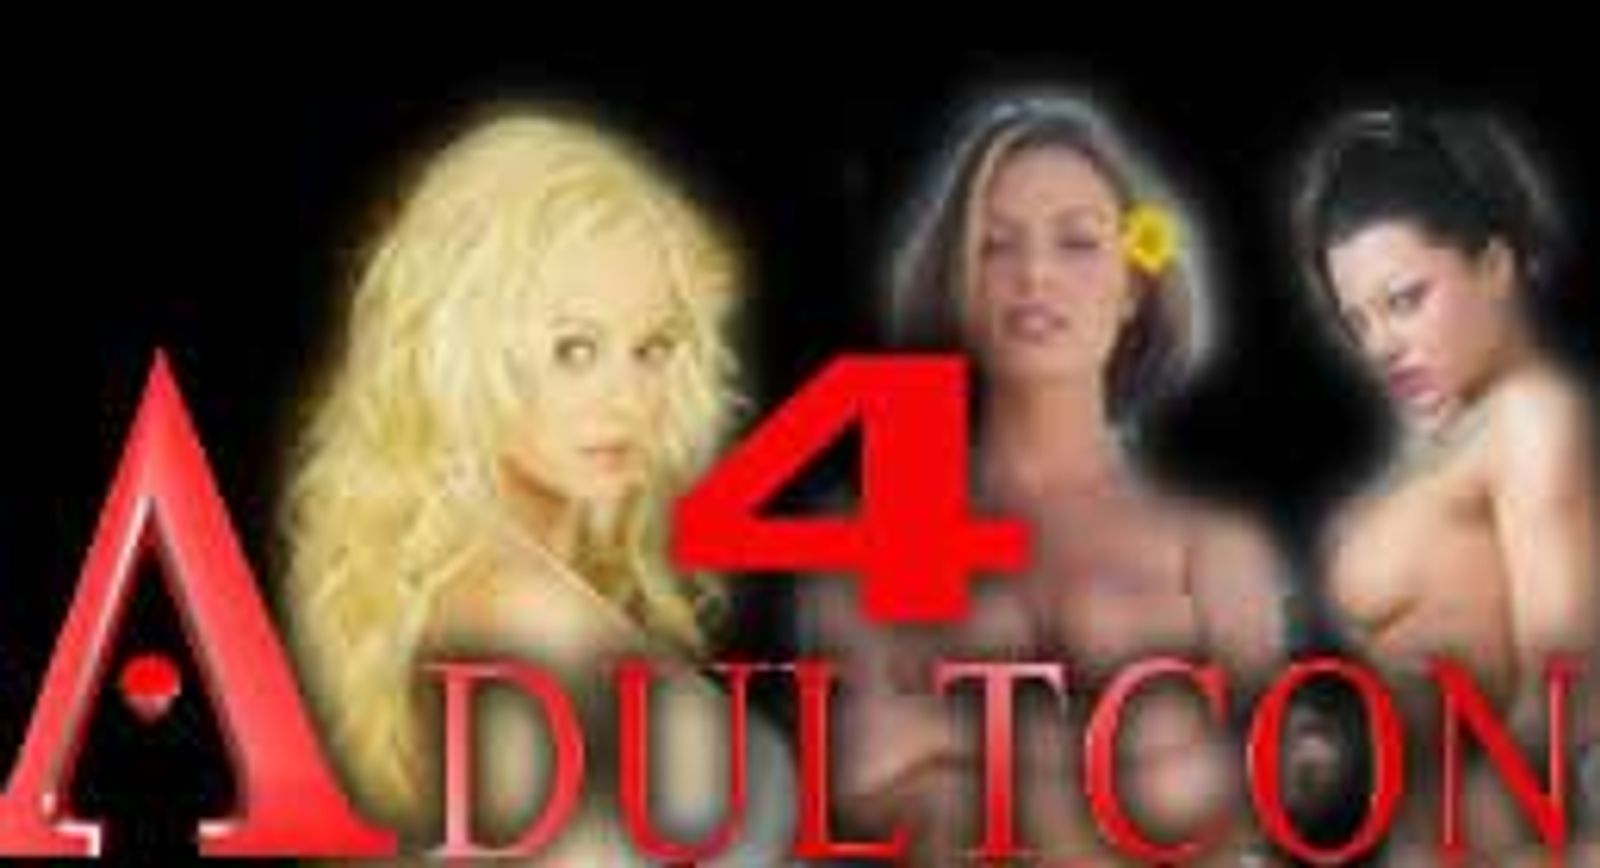 Aurora Snow, Chloe, and Ron Jeremy Appearing At Adultcon 4